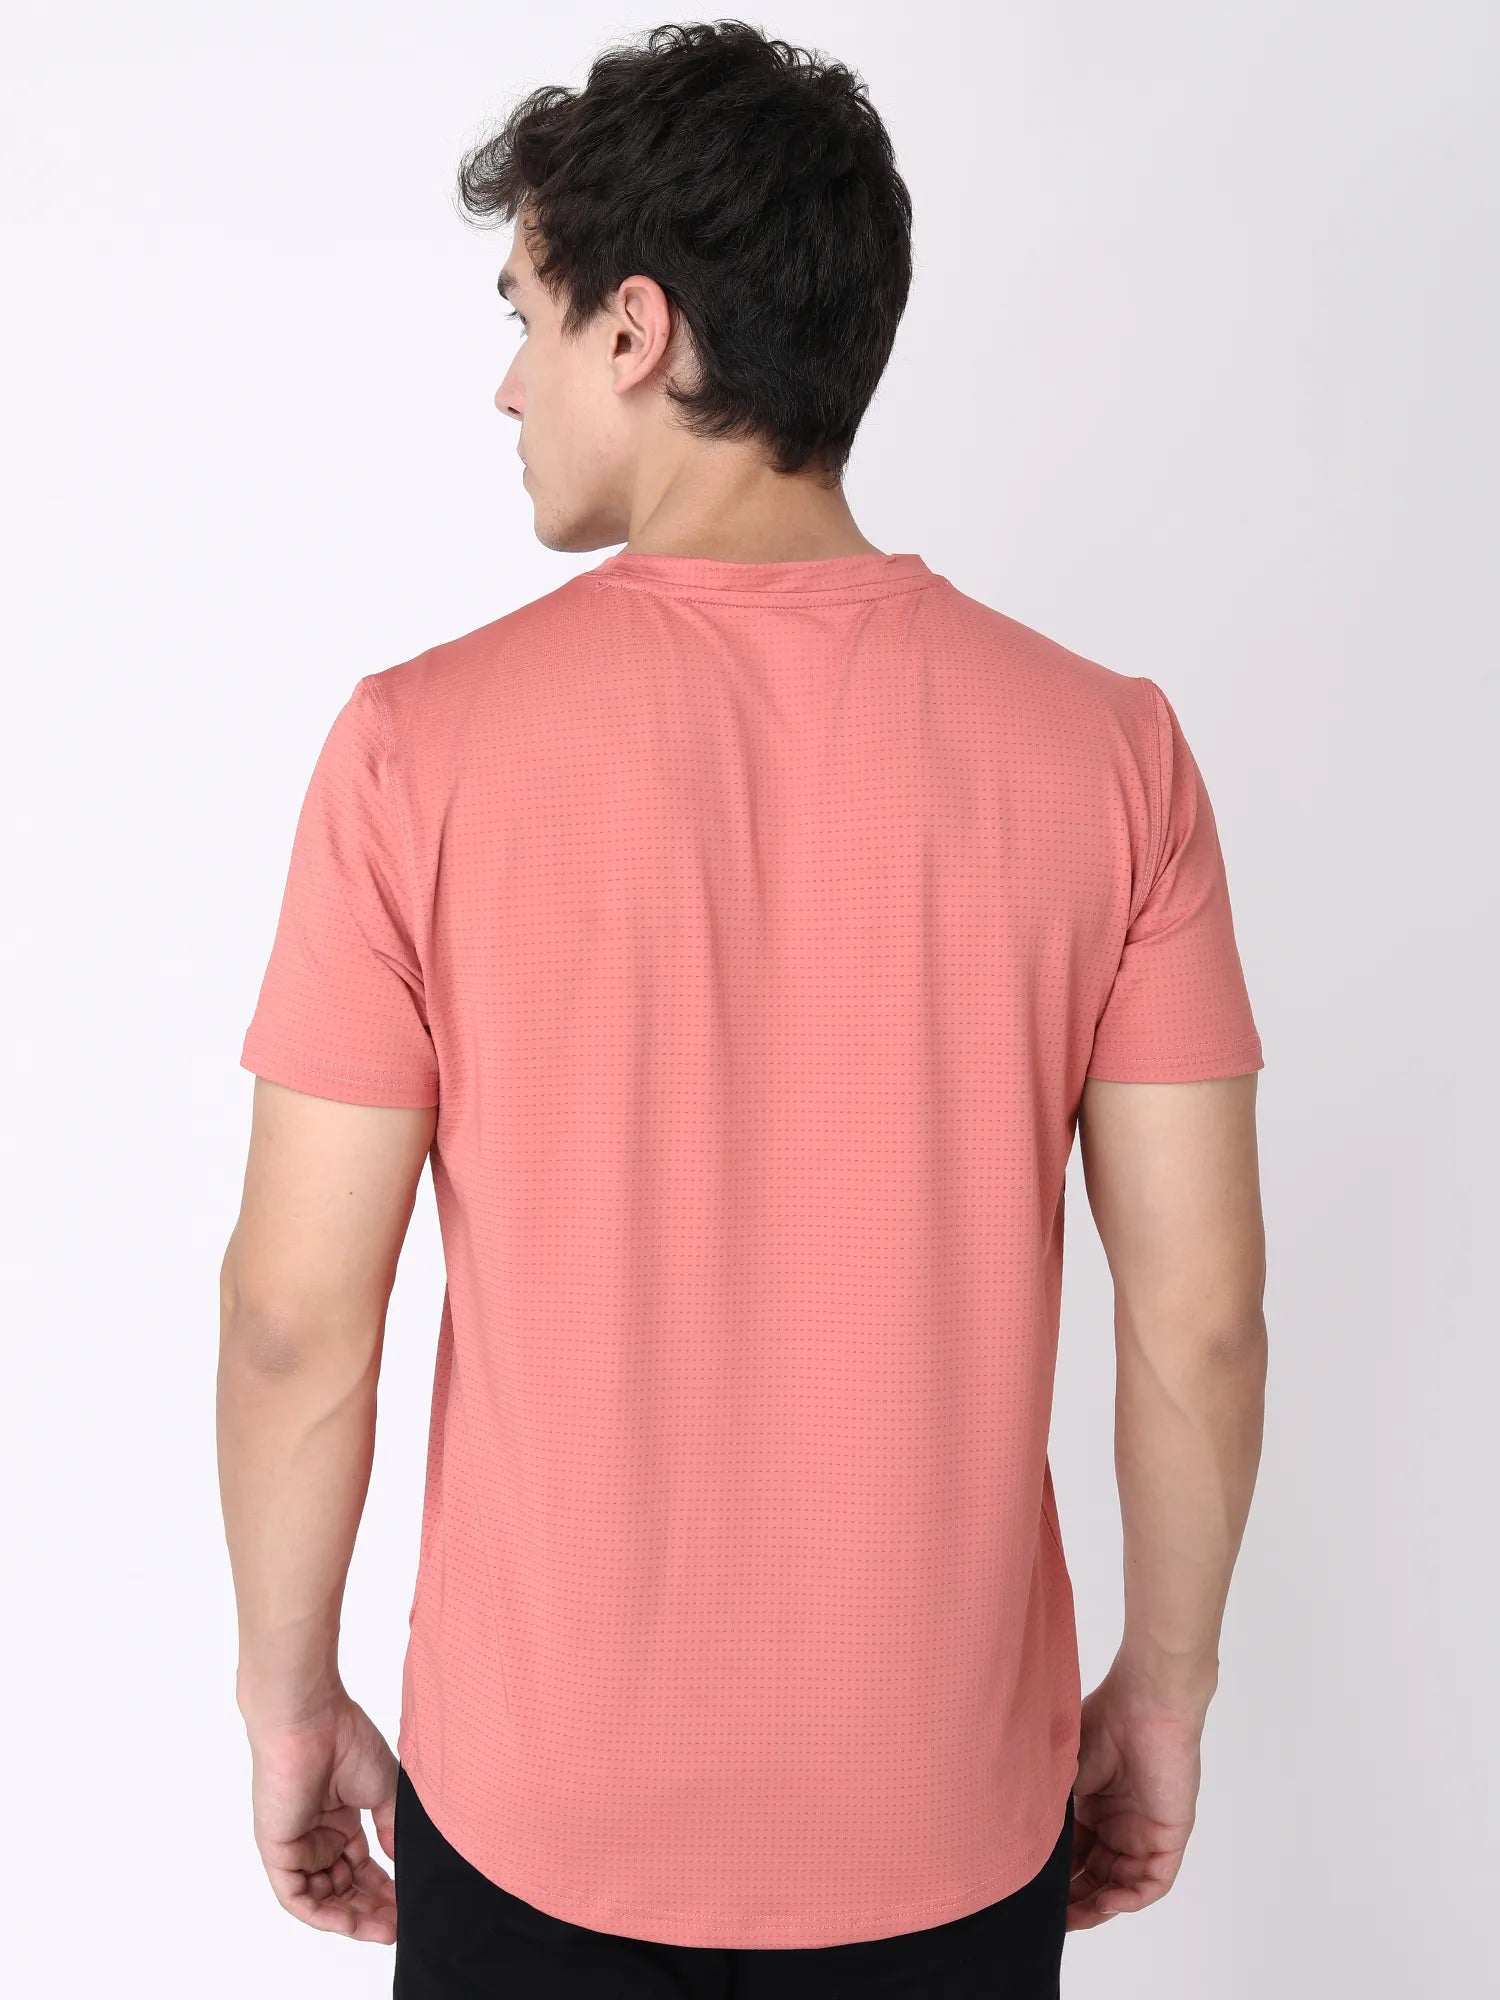 Jeffa Training T-shirt in Coral